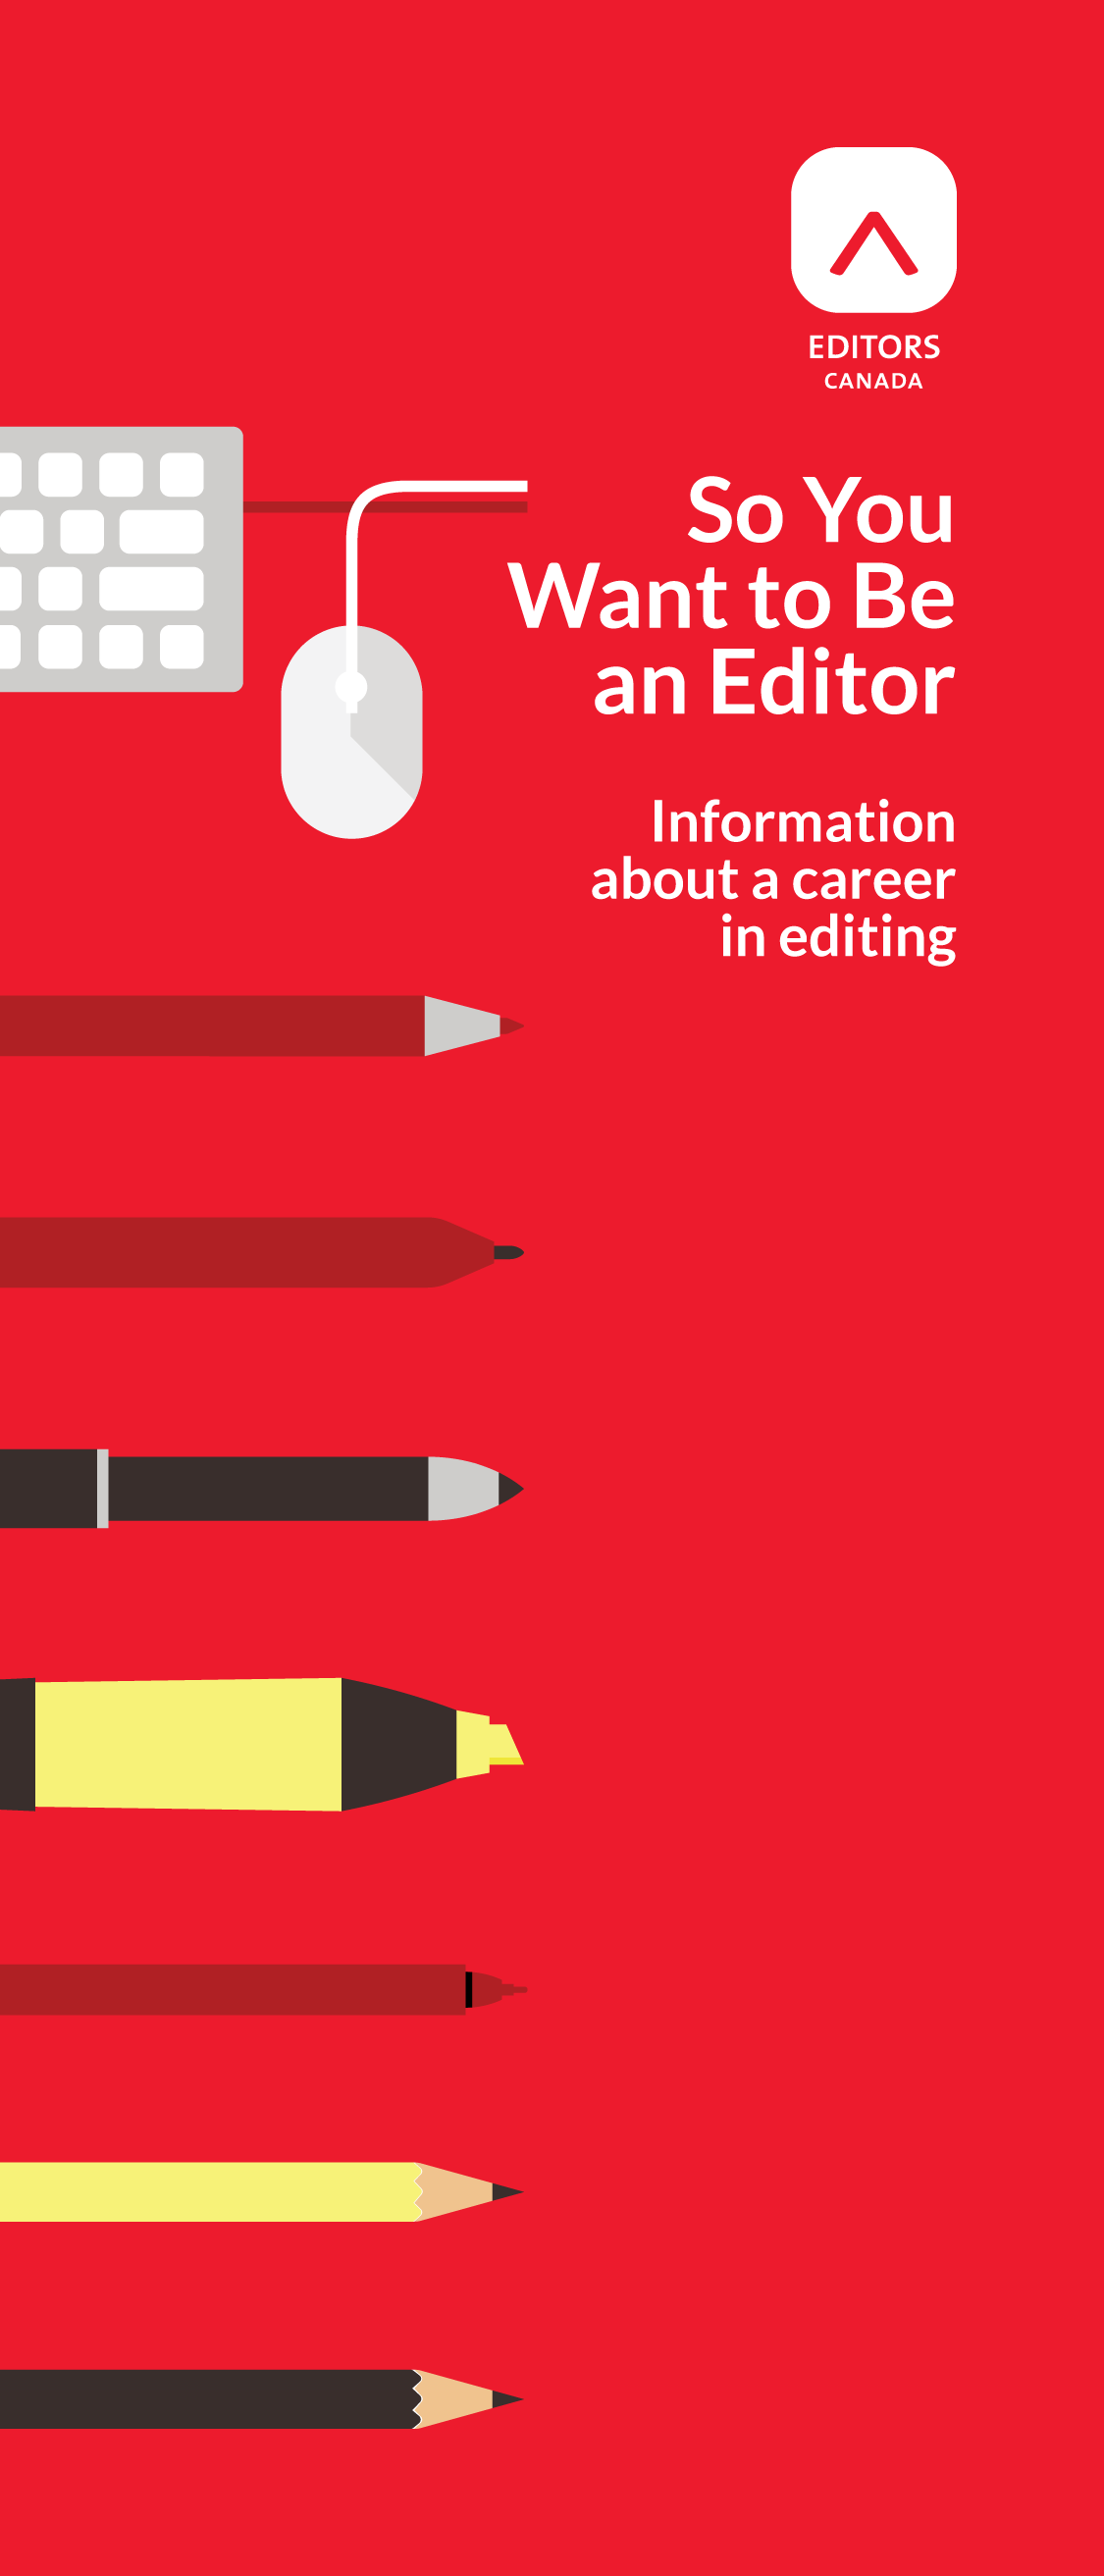 The cover of Editors Canada's career guide entitled "So You Want to Be an Editor: Information about a career in editing" features illustrations of various writing implements, such as a mouse and keyboard, pencils, pens, markers and a yellow highlighter, presented in a stack on a red background.